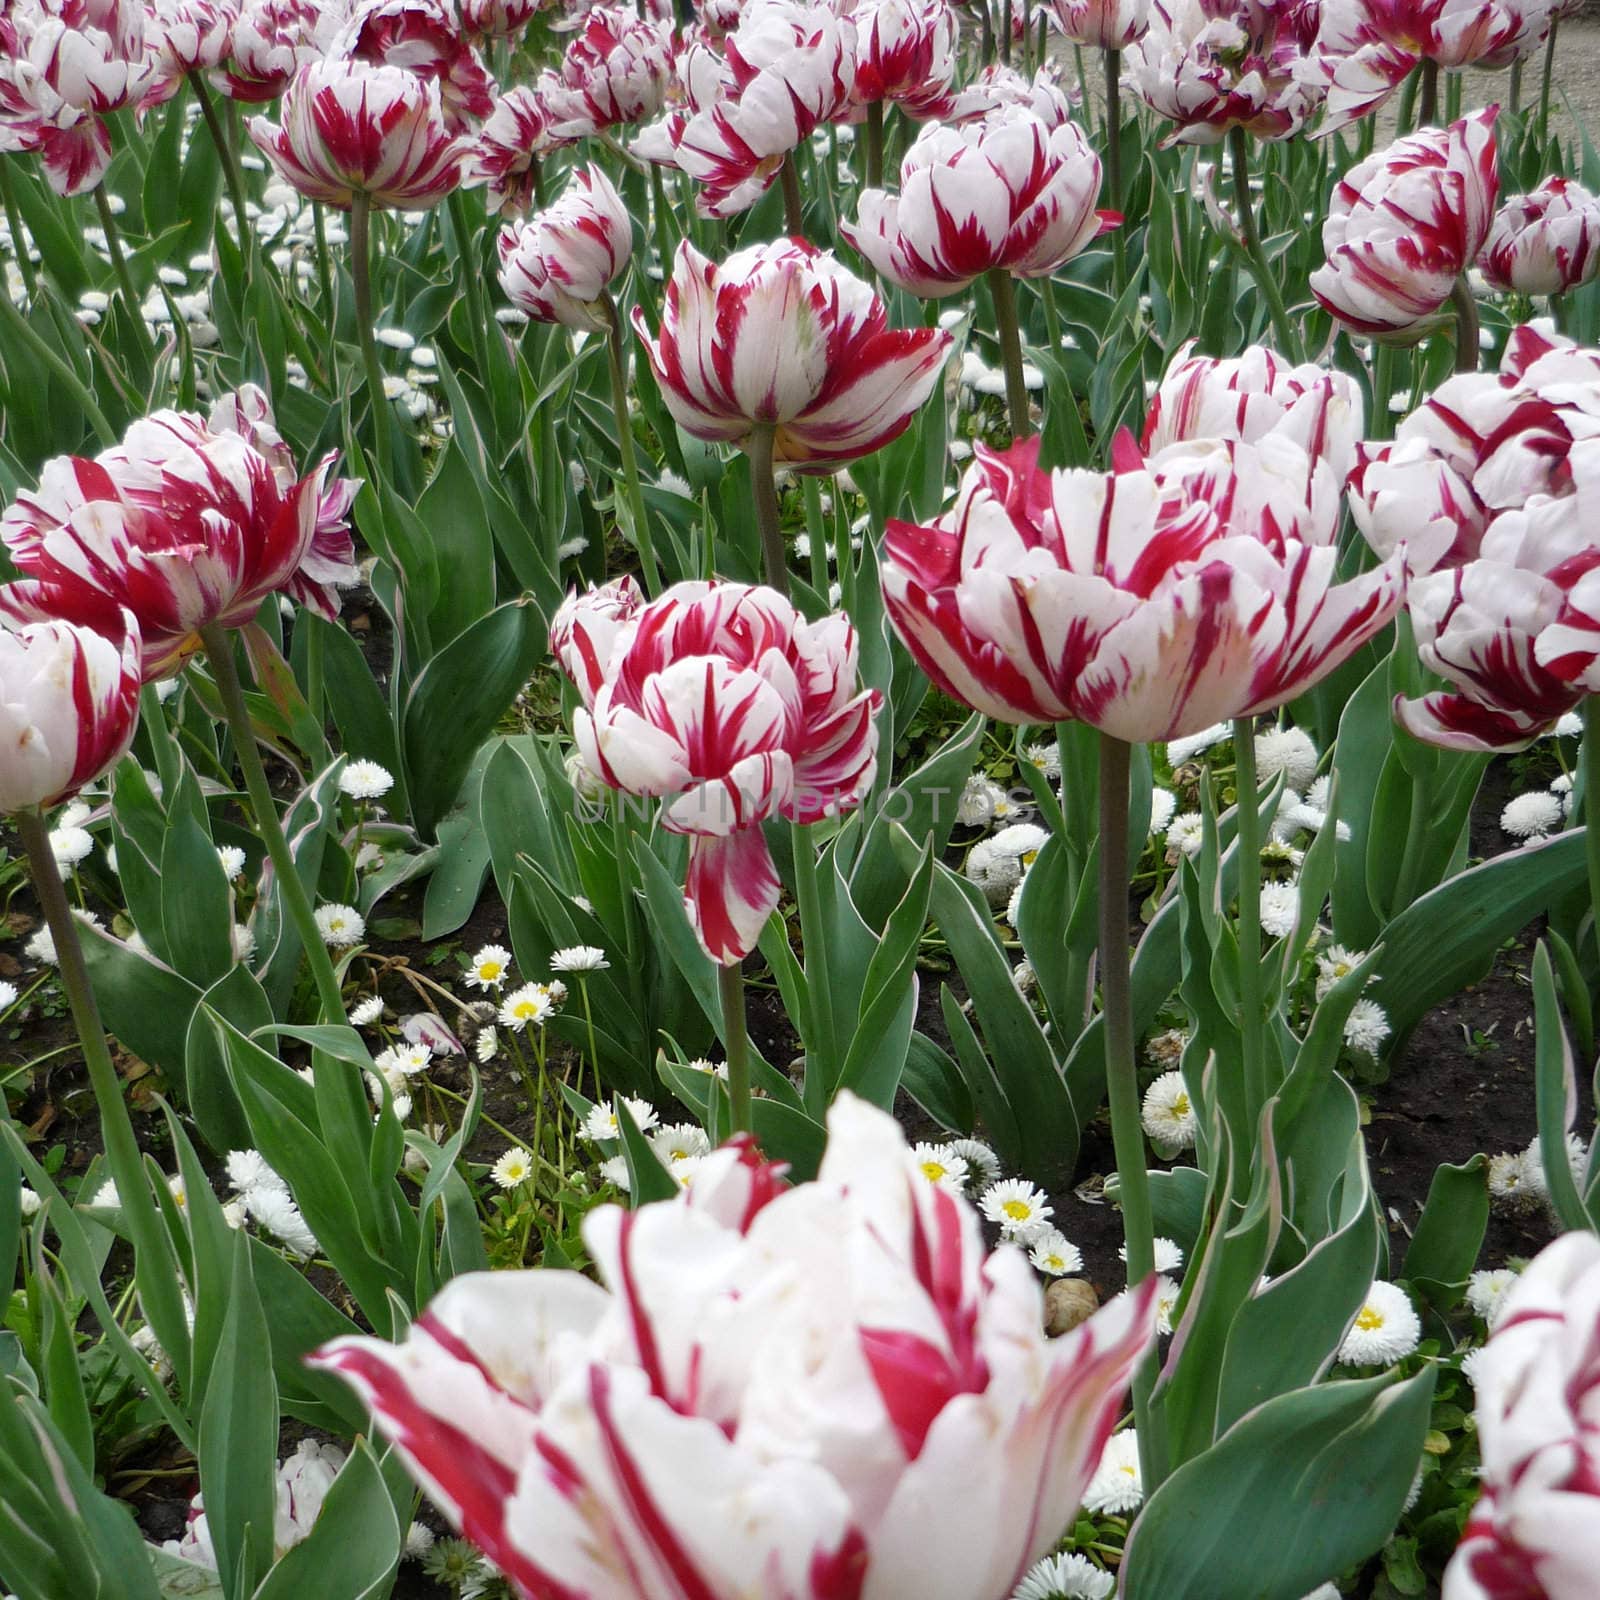 Beautiful pink and white tulips